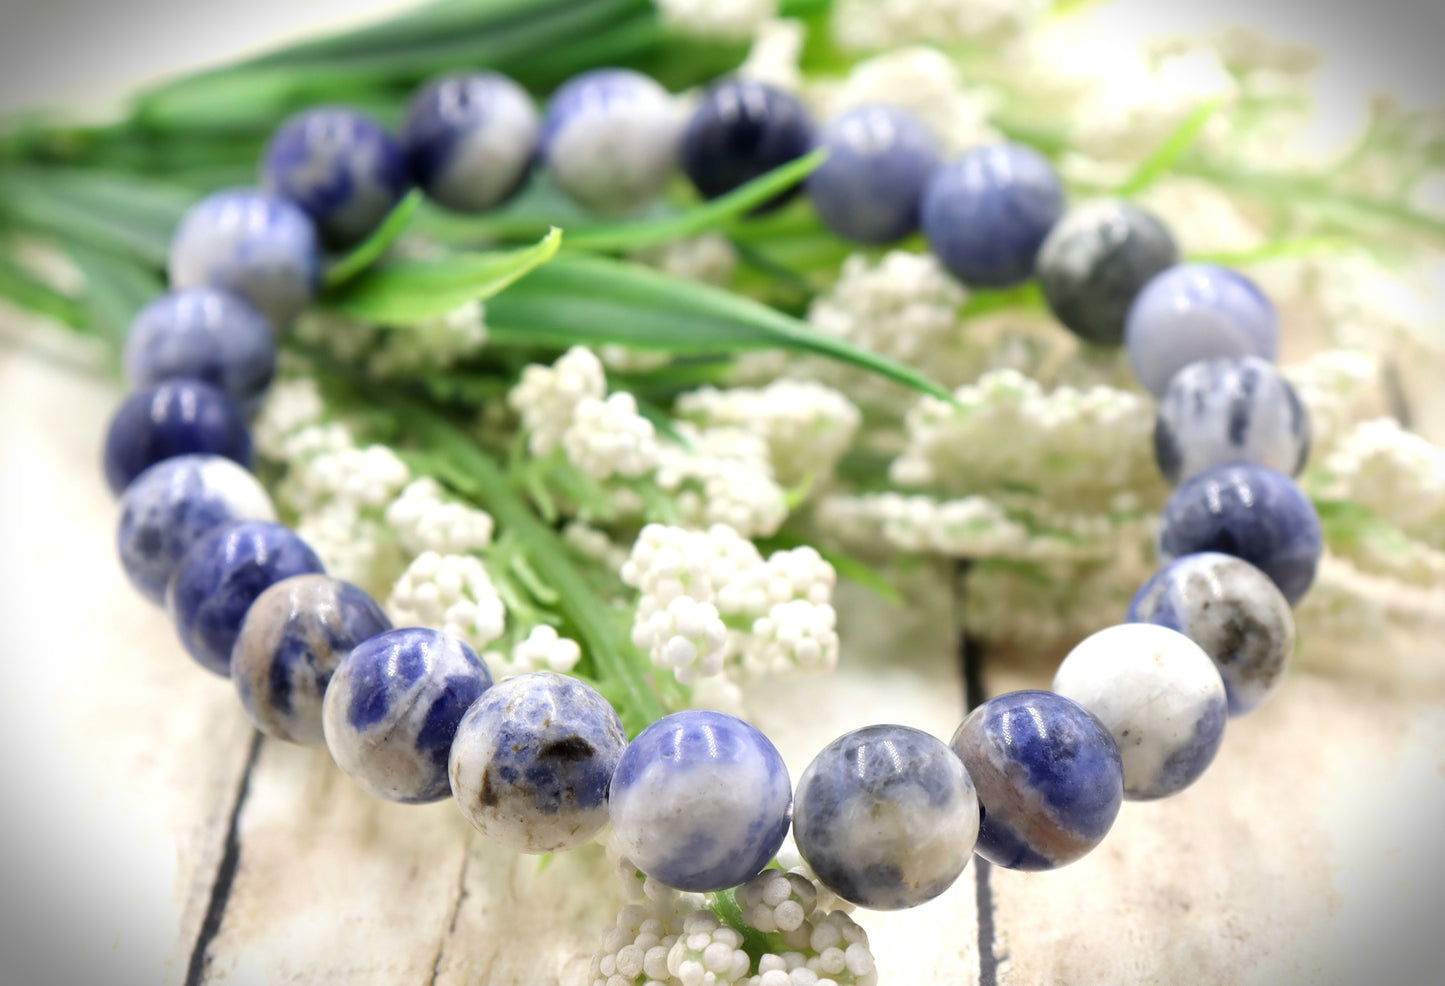 Showing Up to Show Off Our Sodalite Gemstone 8.5mm Bracelet by Monkeys Mojo